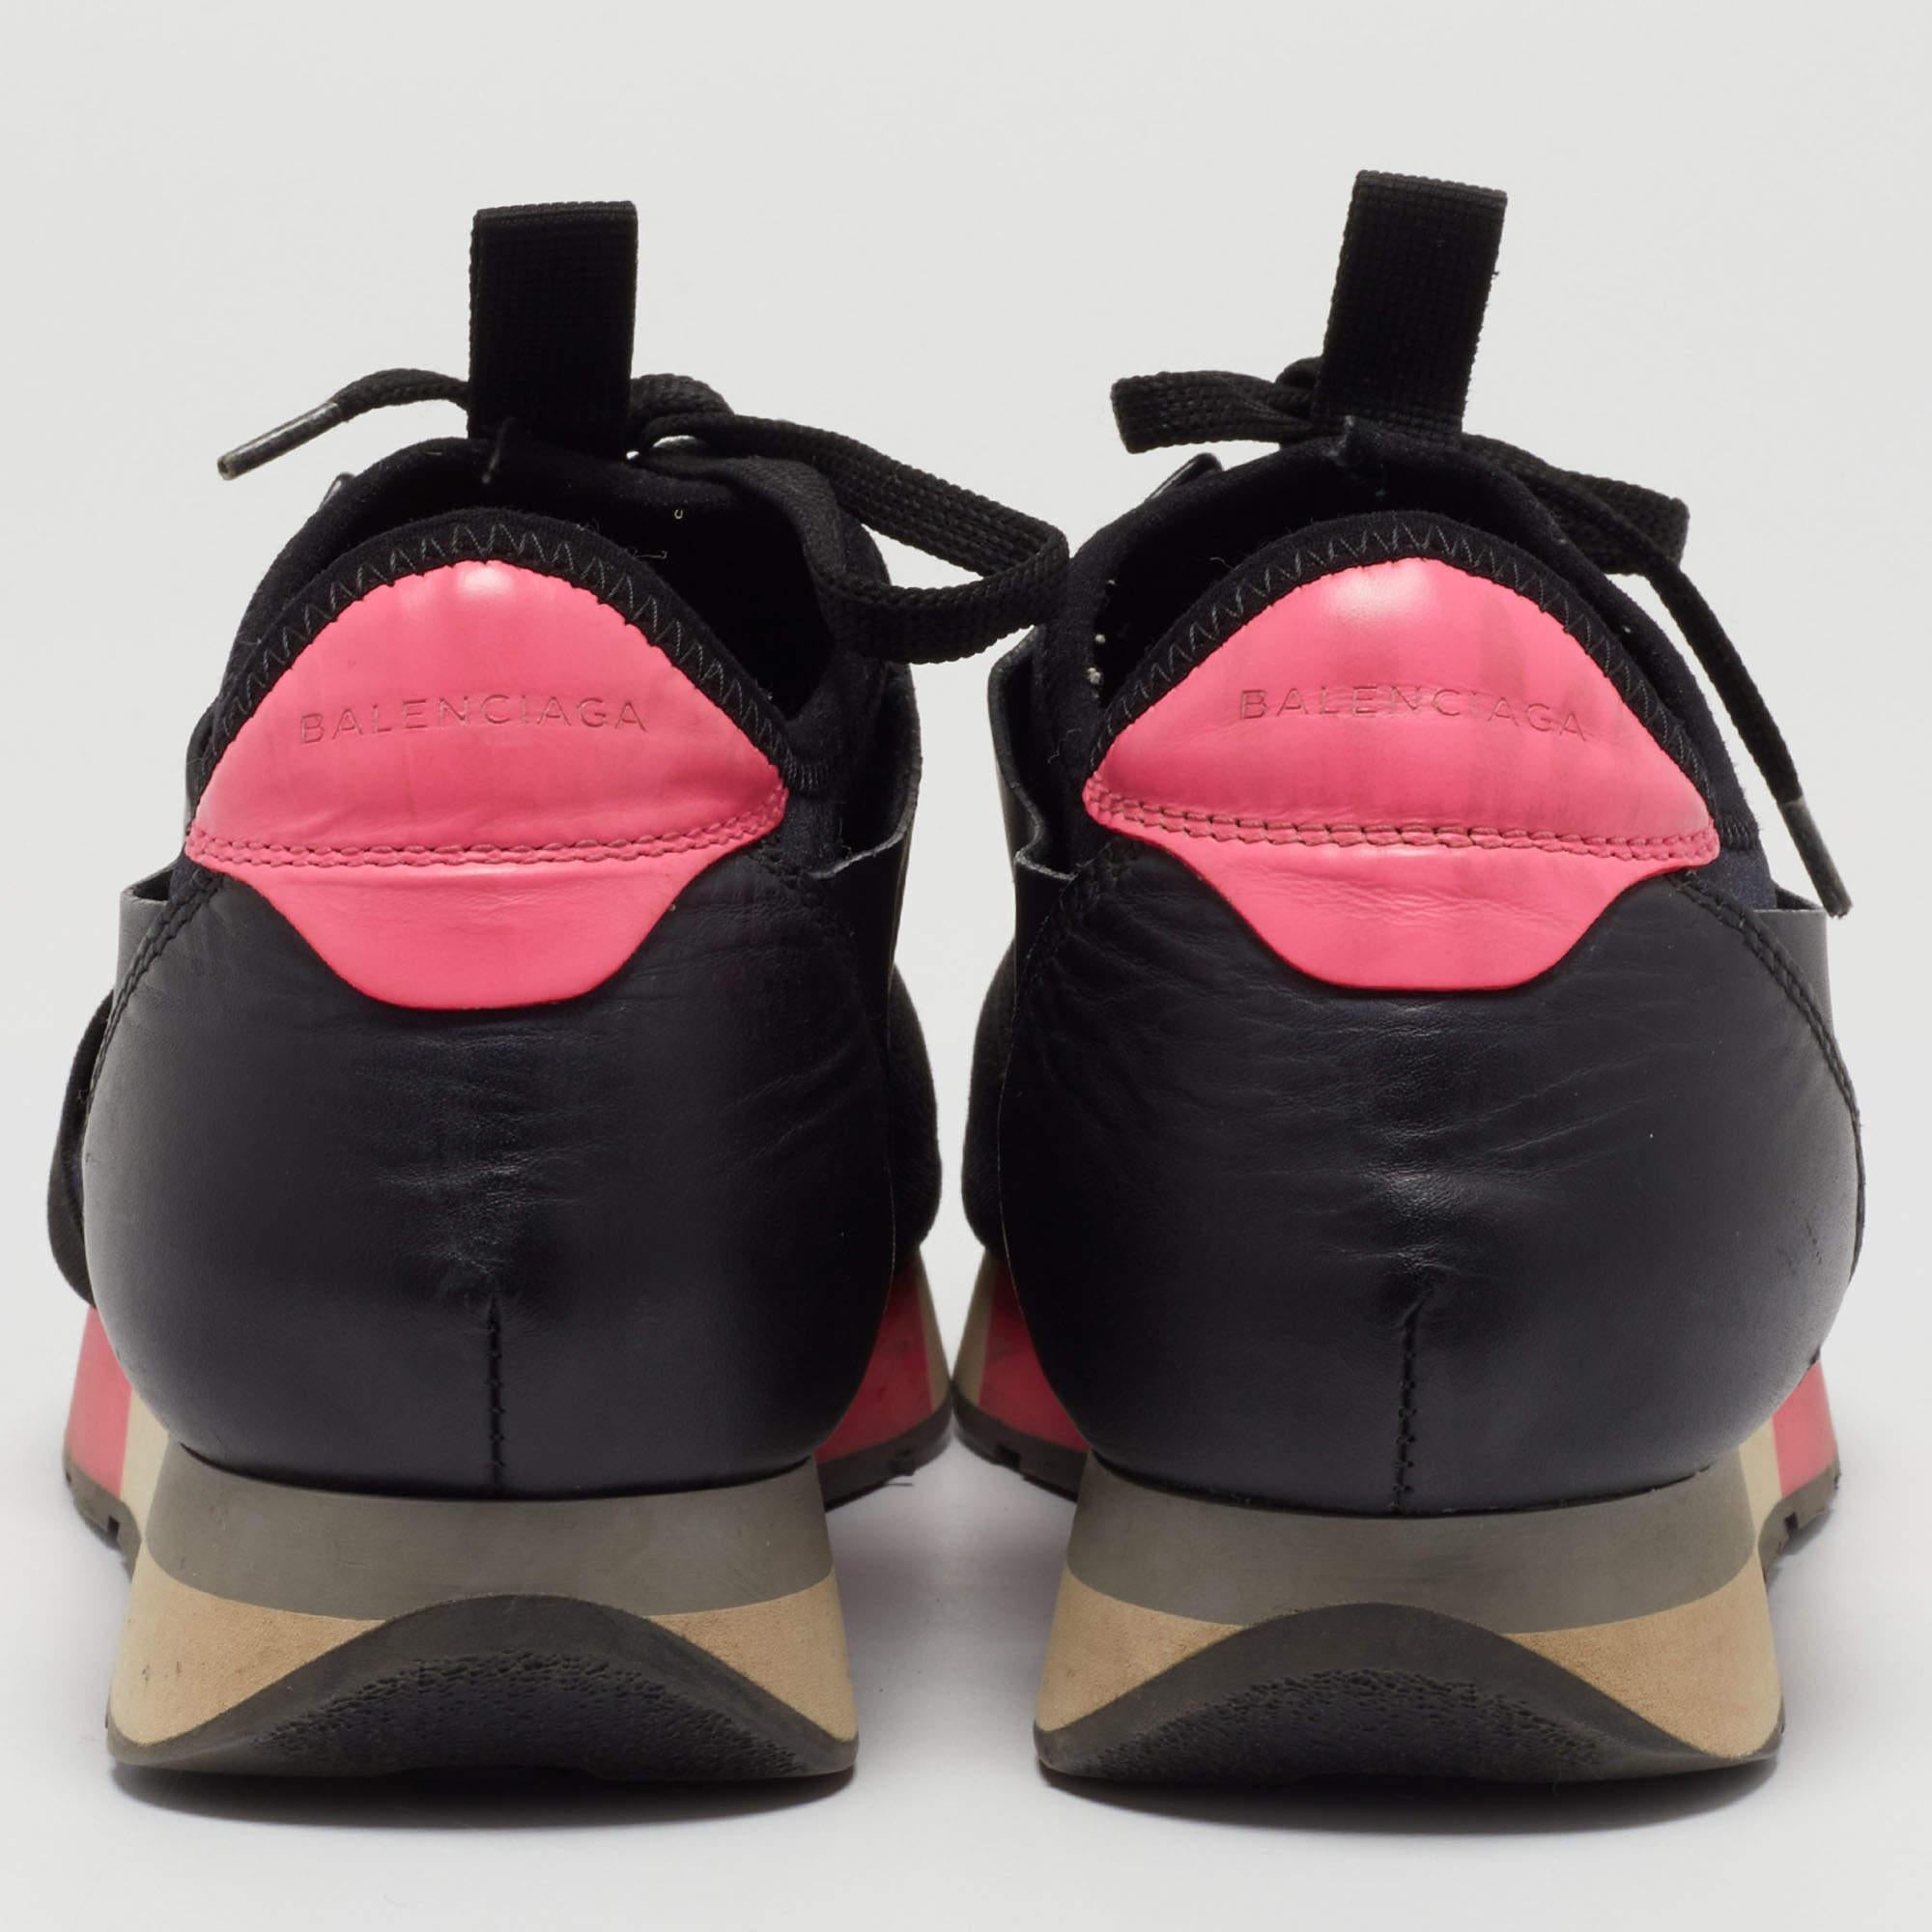 Balenciaga Black/Pink Leather and Fabric Race Runner Sneakers Size 38 In Fair Condition For Sale In Dubai, Al Qouz 2